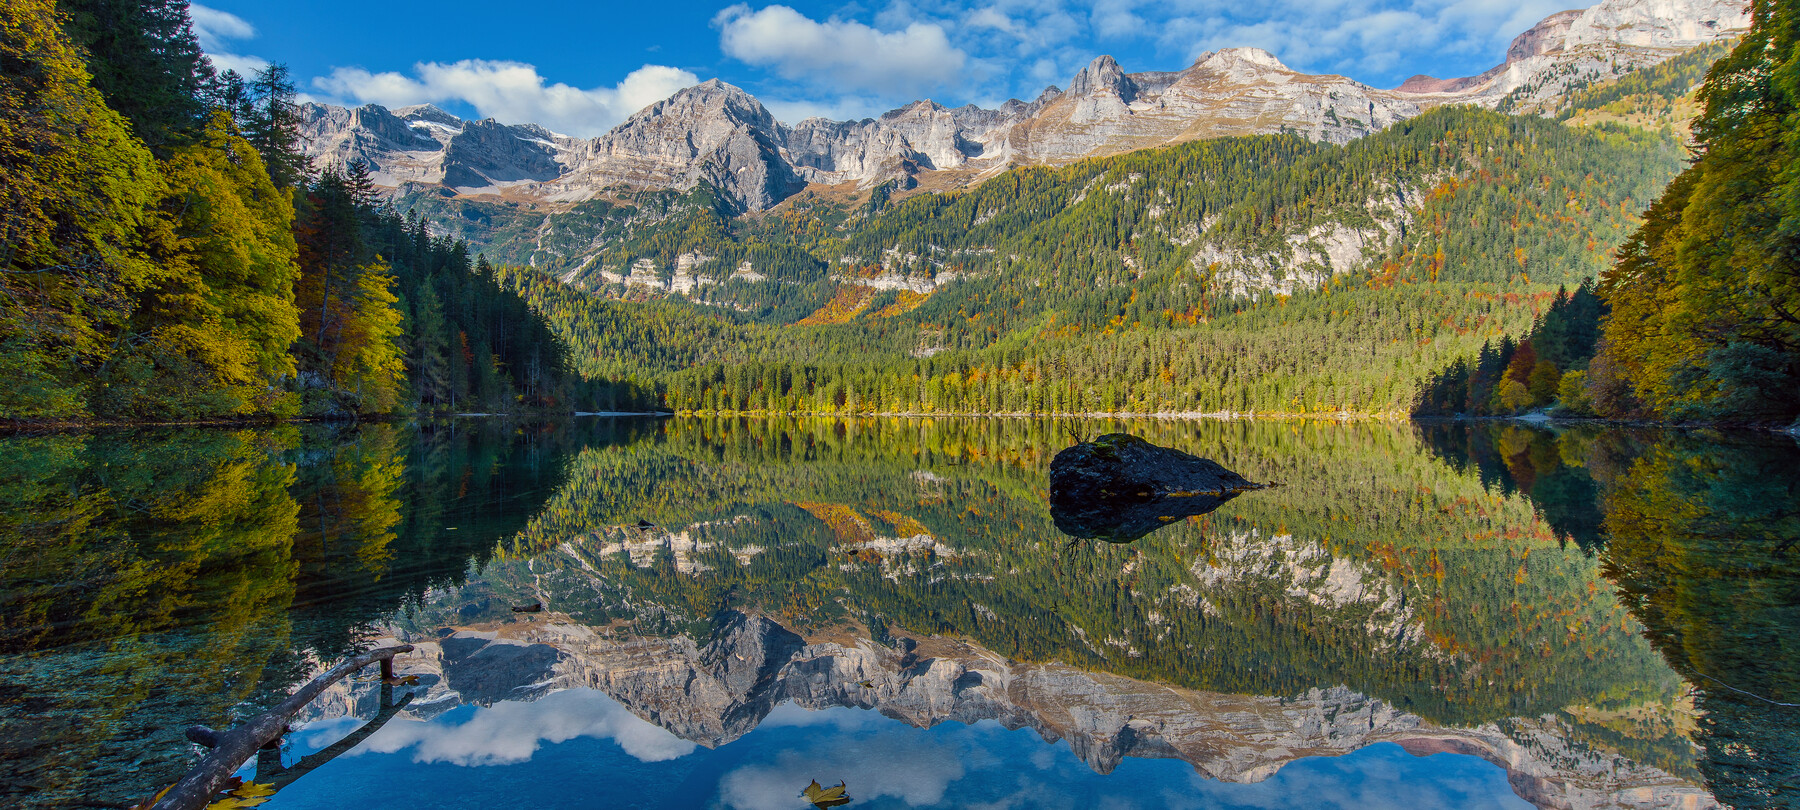 Legends of the Dolomites: the red lake